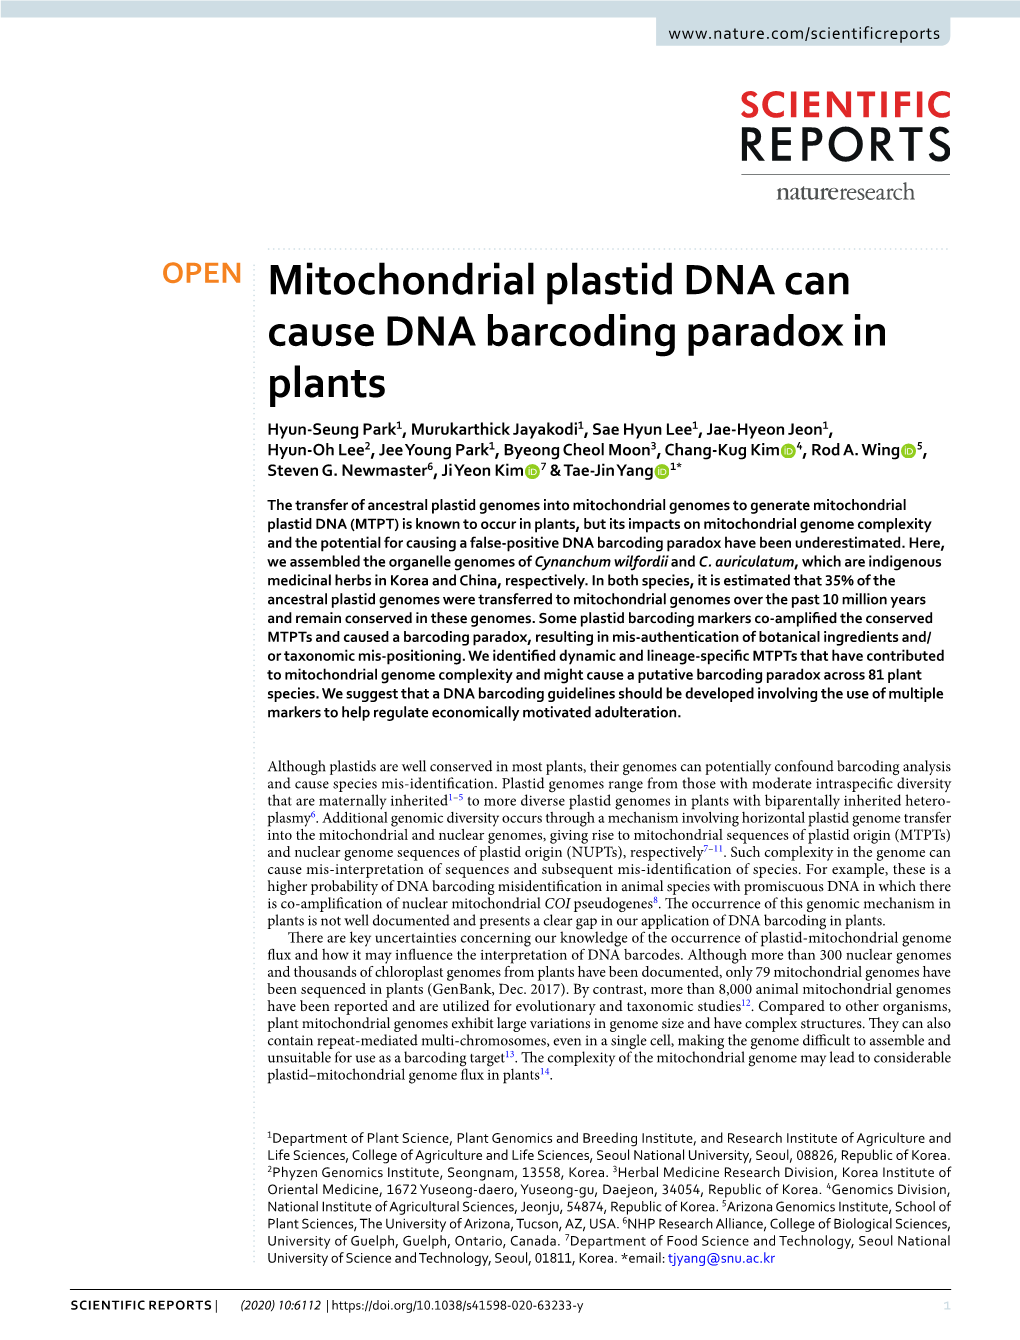 Mitochondrial Plastid DNA Can Cause DNA Barcoding Paradox in Plants